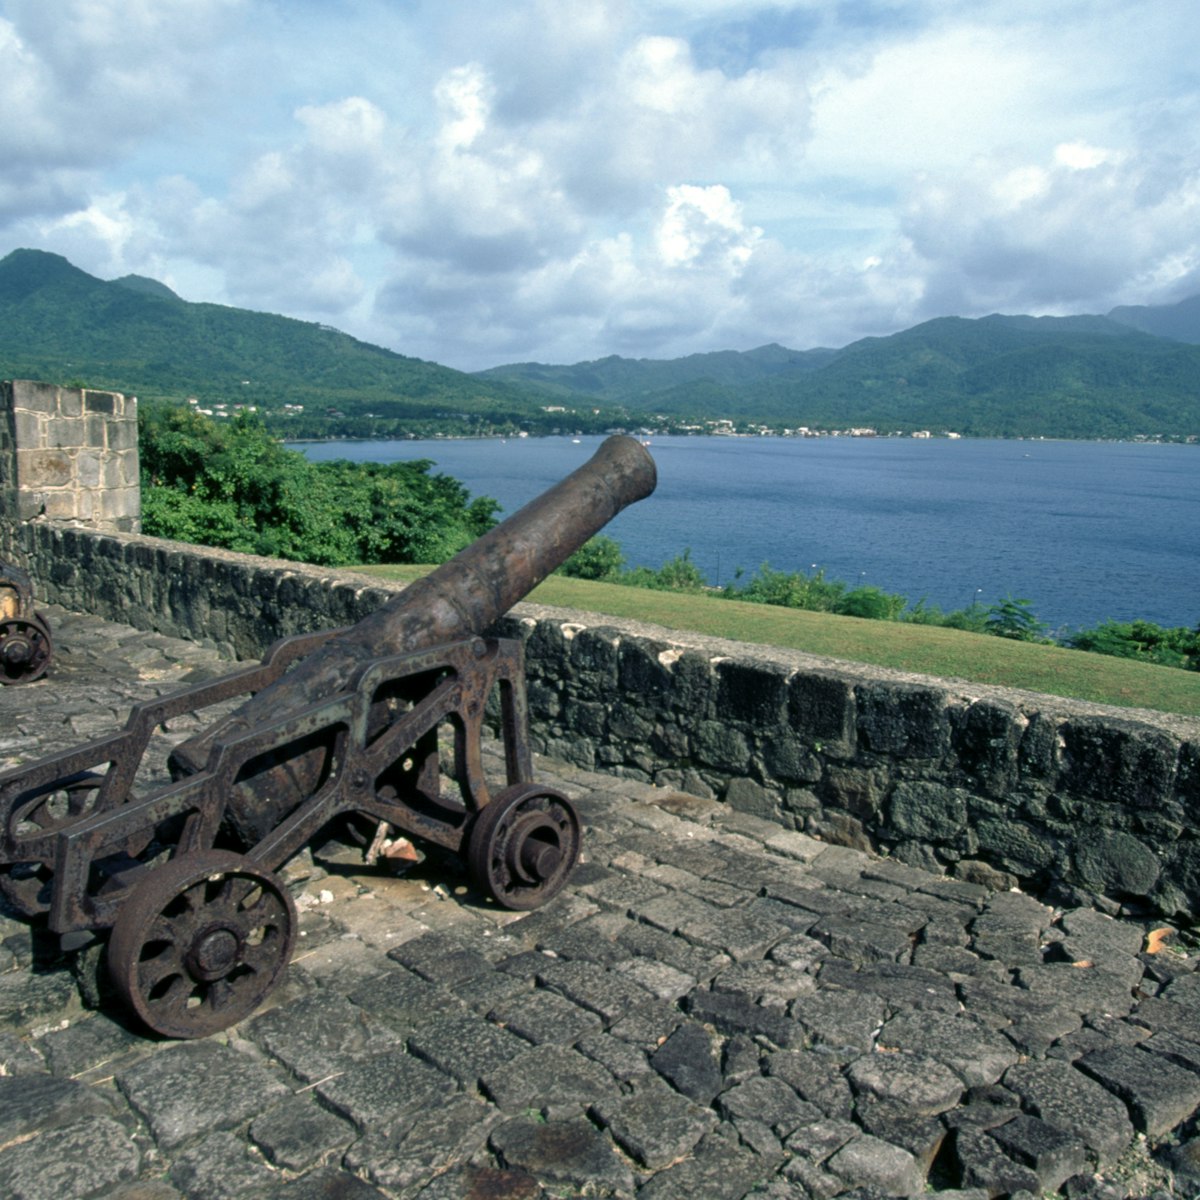 DOMINICA - APRIL 23: Ancient cannon in Fort Shirley, 18th century, old British outpost on the island of Dominica, Cabrits National Park, Dominica. (Photo by DeAgostini/Getty Images)